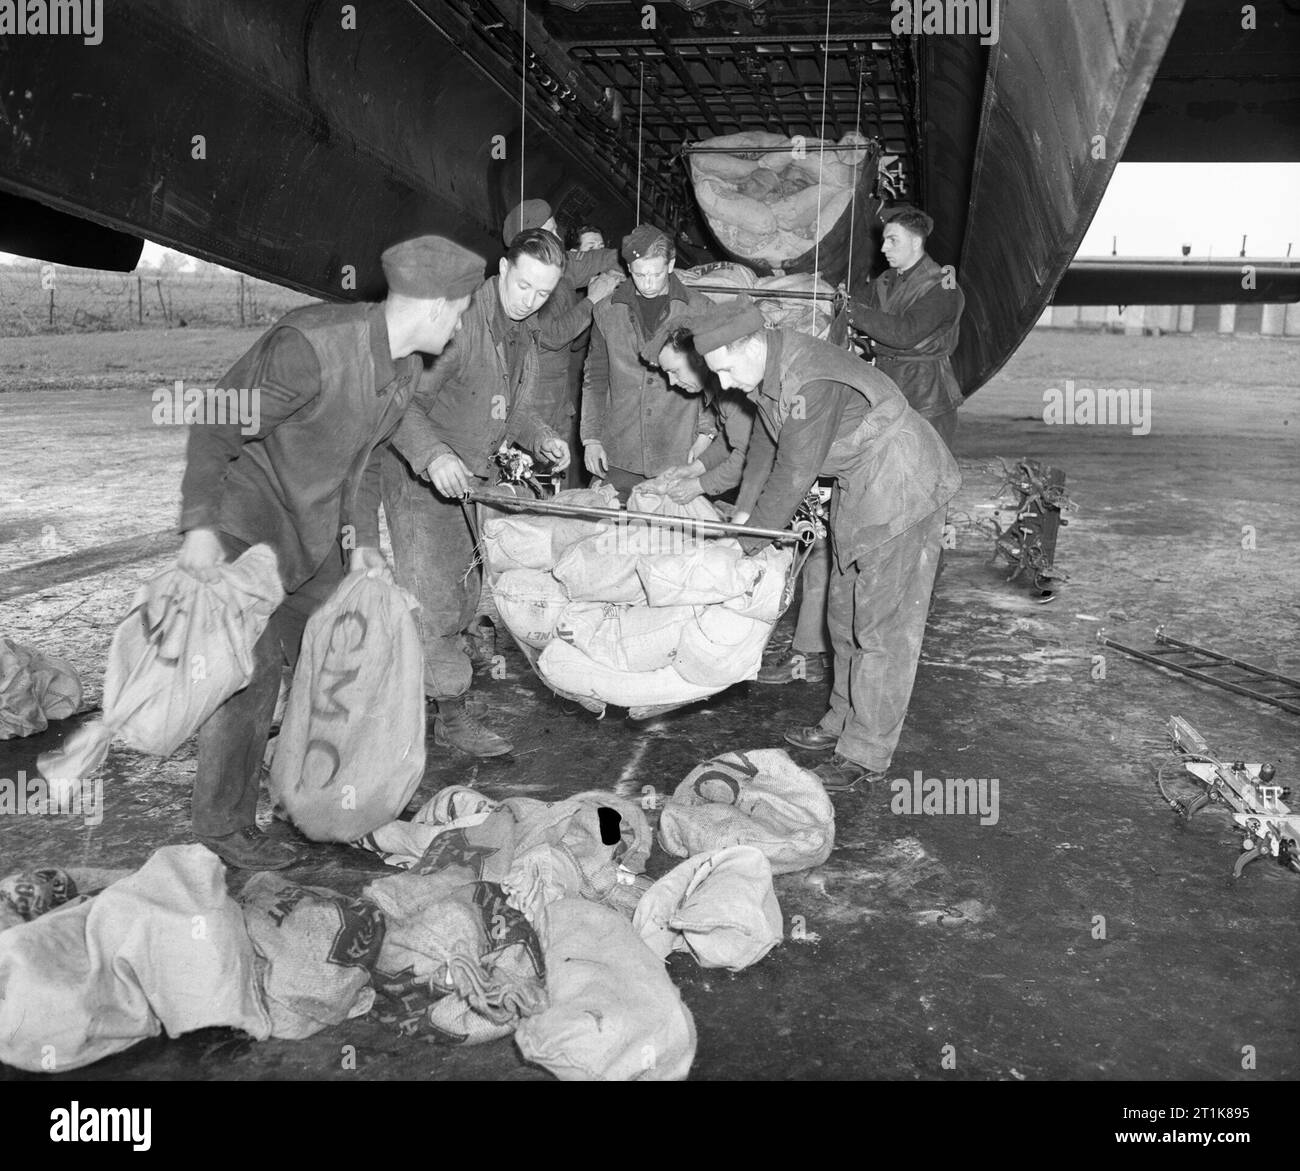 Royal Air Force Bomber Command, 1942-1945. Operation MANNA. Ground crew loading food supplies into slings for hoisting into the bomb bay of an Avro Lancaster of No. 514 Squadron RAF at Waterbeach, Cambridgeshire. Between 29 April and 7 May 1945, Lancasters of Bomber Command dropped 6,672 tons of food to the starving populace of a large area in Western Holland still in German hands. Stock Photo